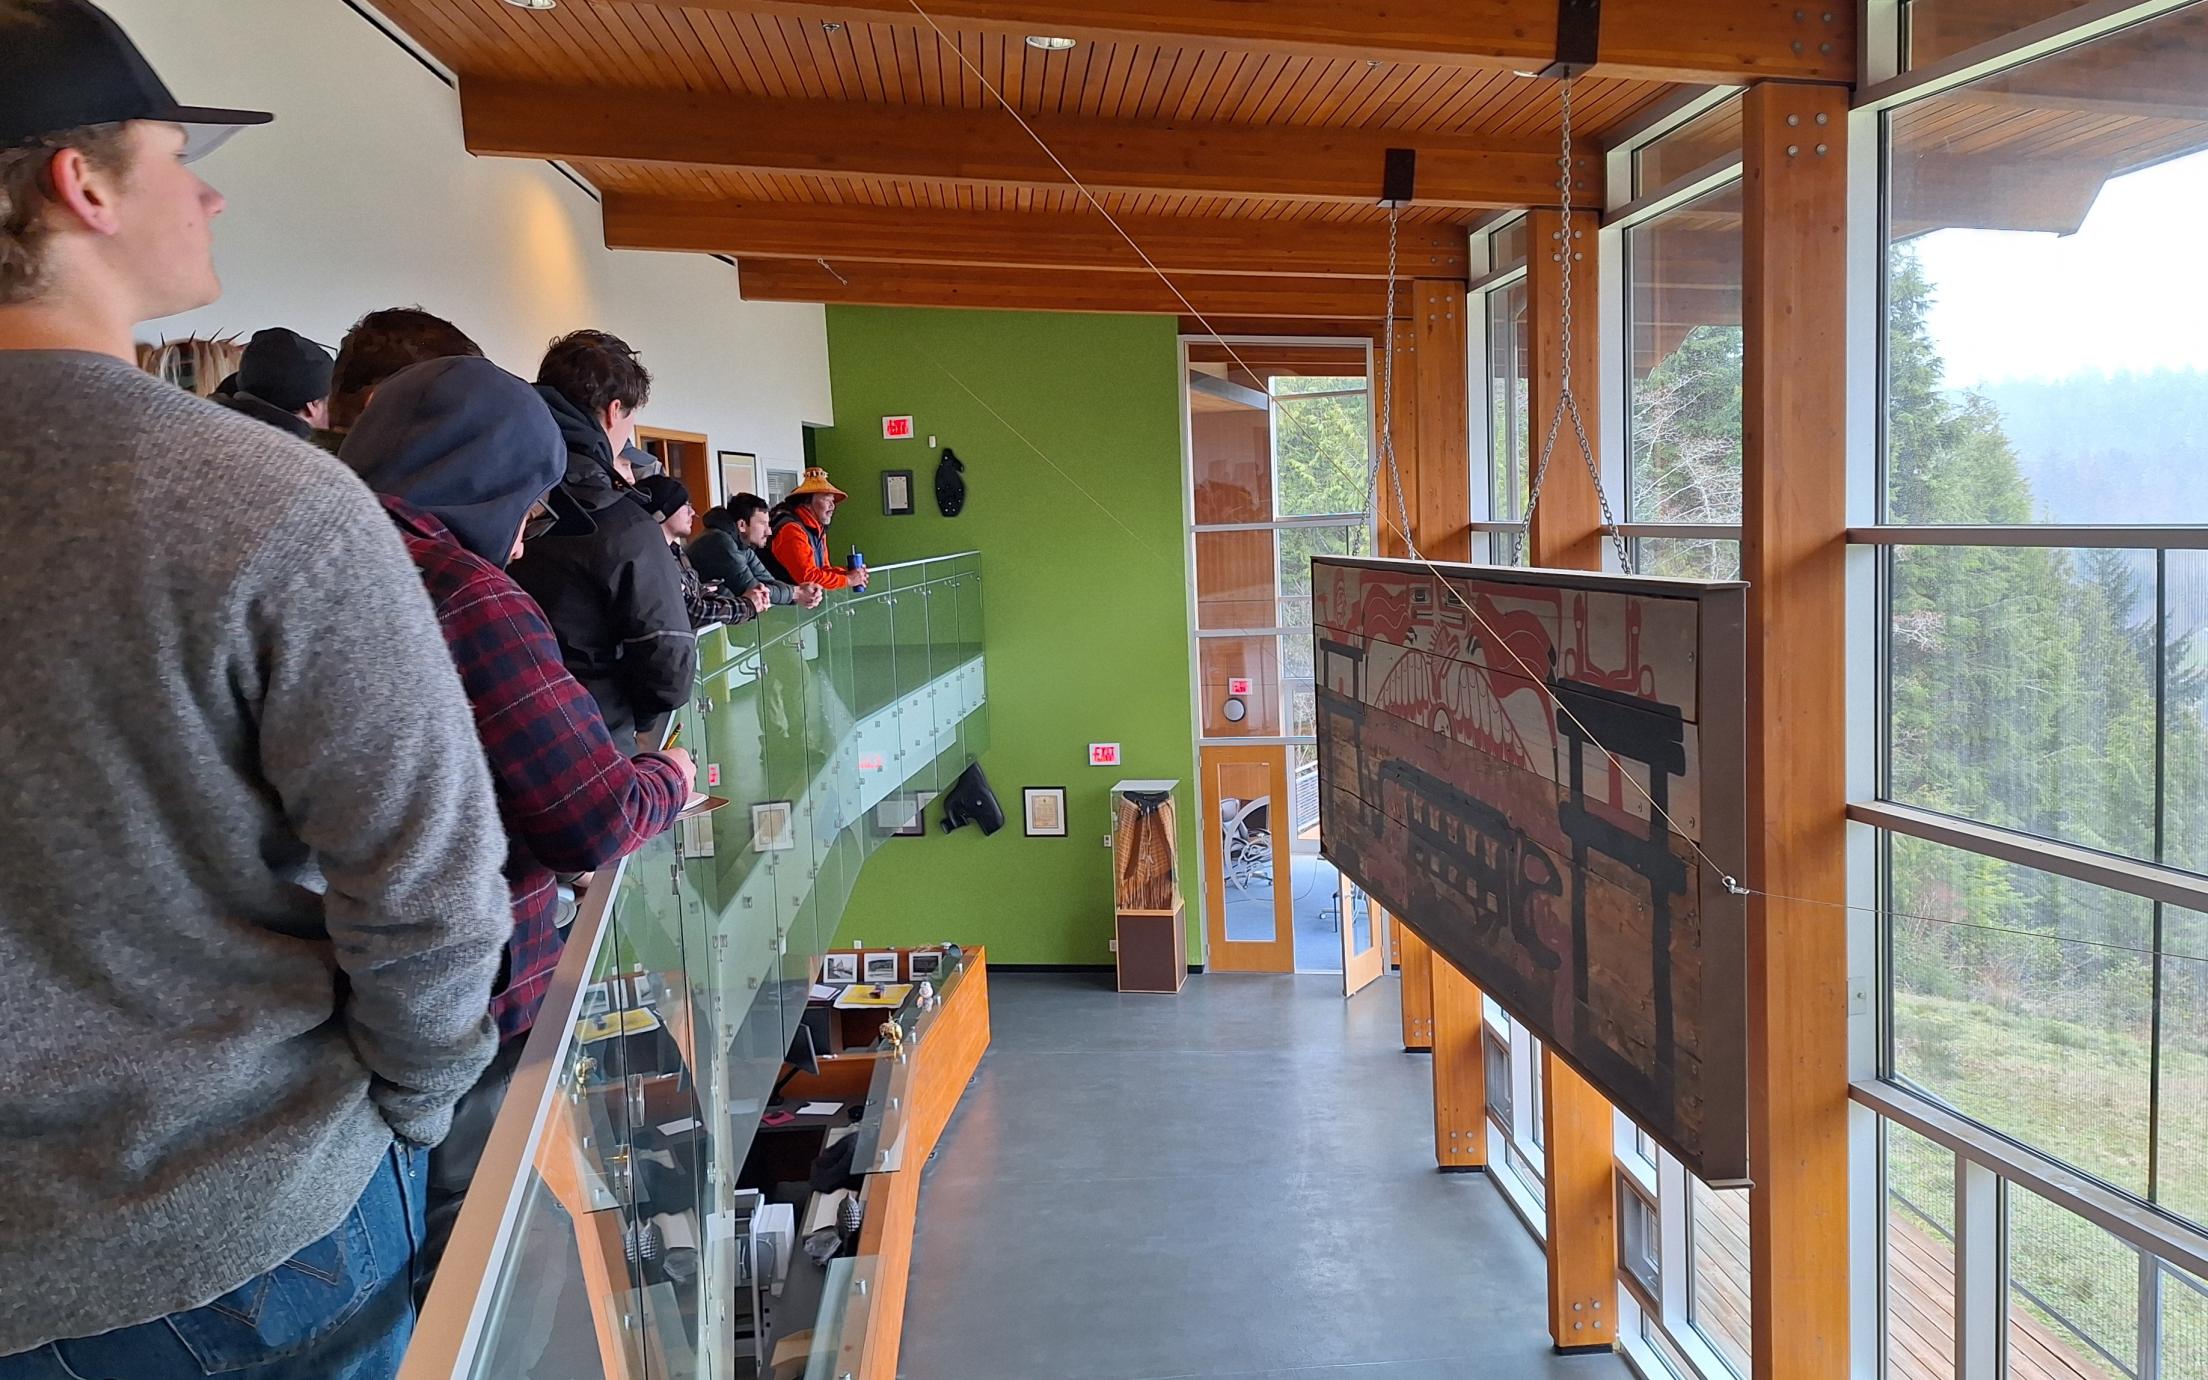 Students look at a piece of art detailing the thunderbird story with the huu-ay-aht nation, in front of a window overlooking a coastal forest.